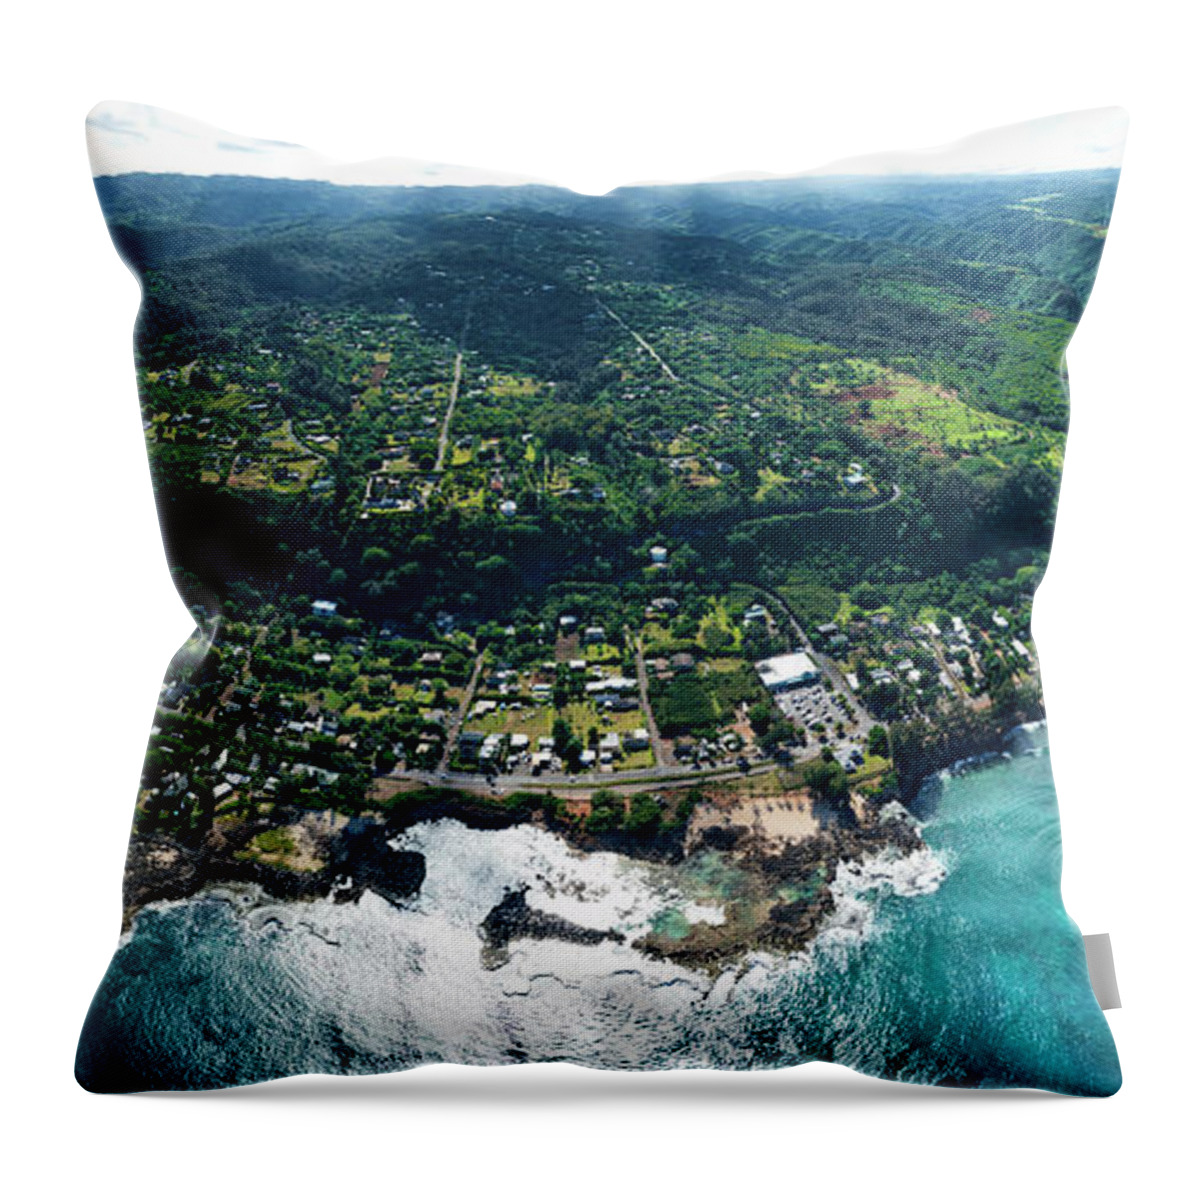 Helicopter Throw Pillow featuring the photograph Sharks Cove - North Shore by Sean Davey